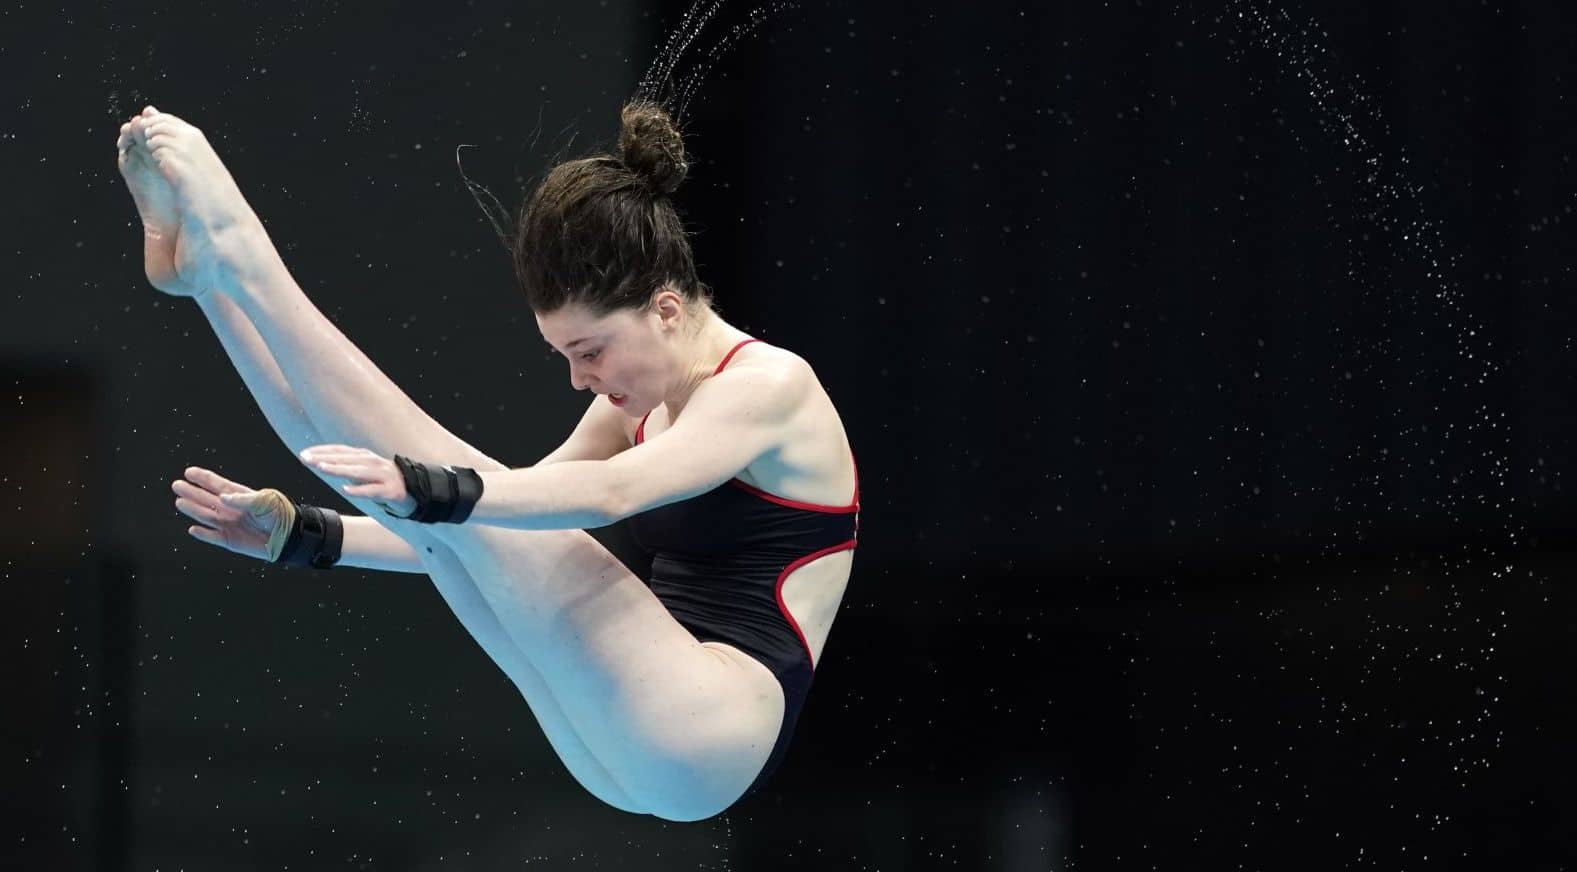 Teenager andrea spendolini-sirieix came desperately close to a first fina world cup medal